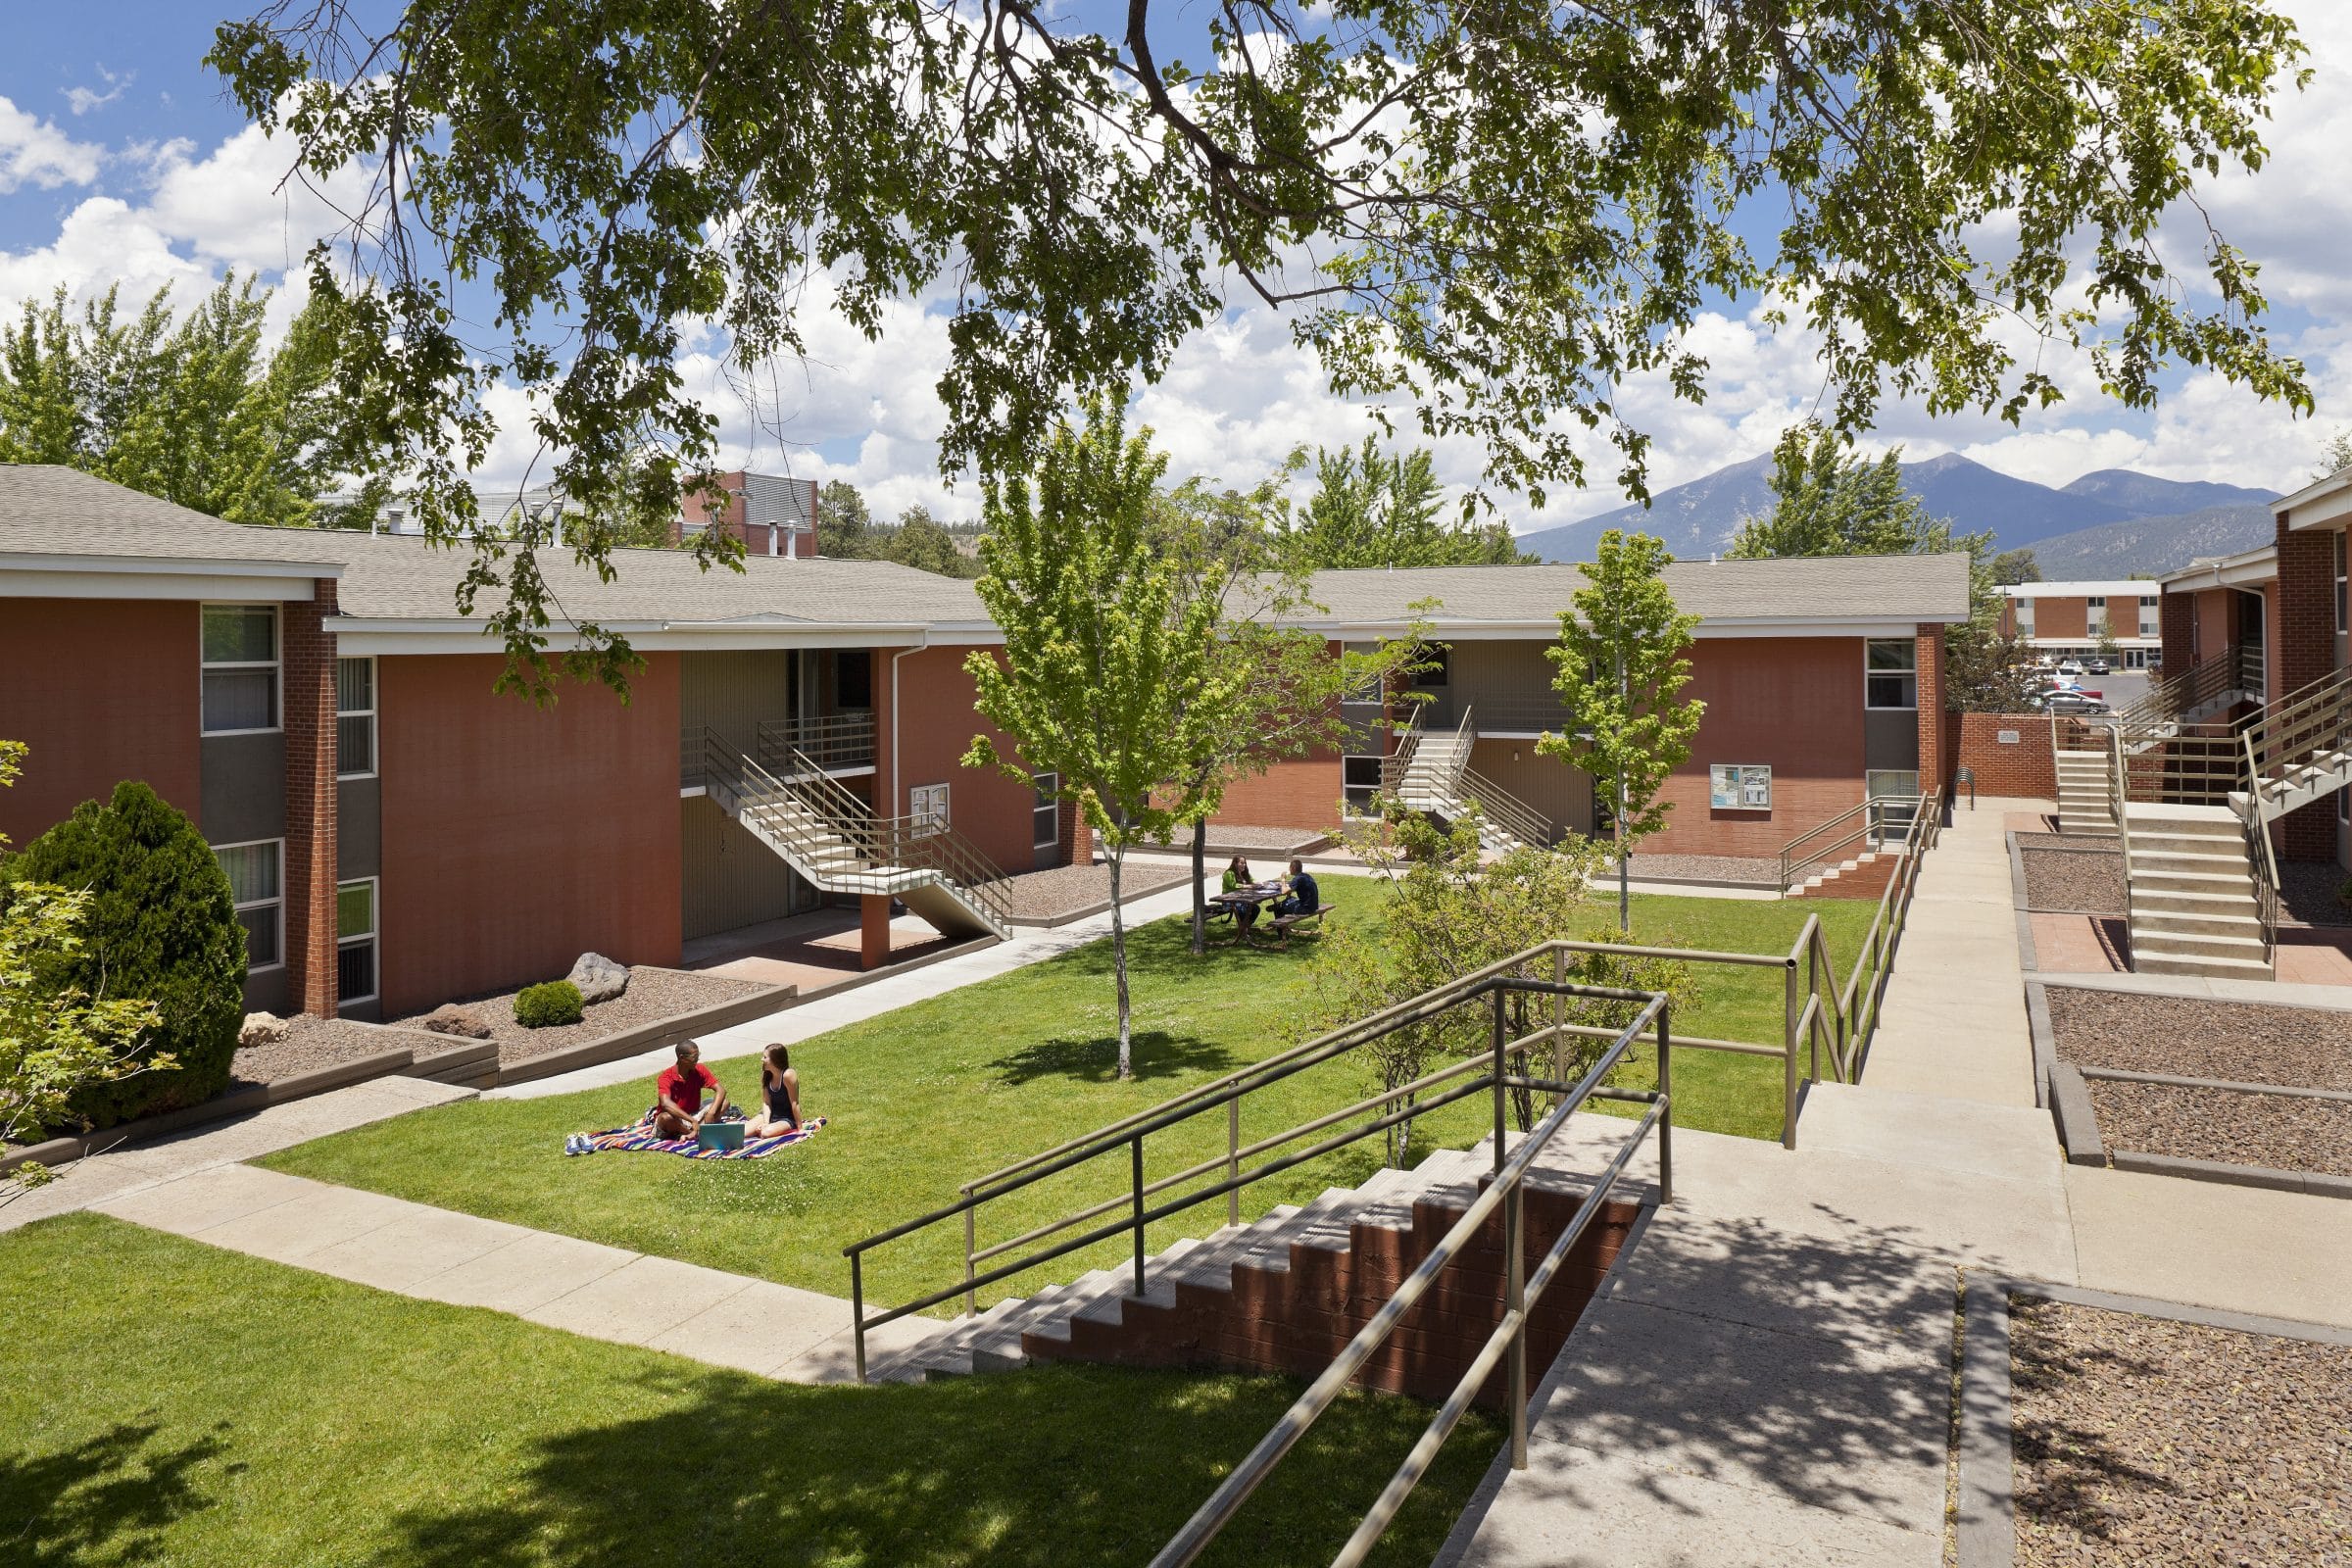 Picture of campus heights courtyard with two people having a picnic on the grass